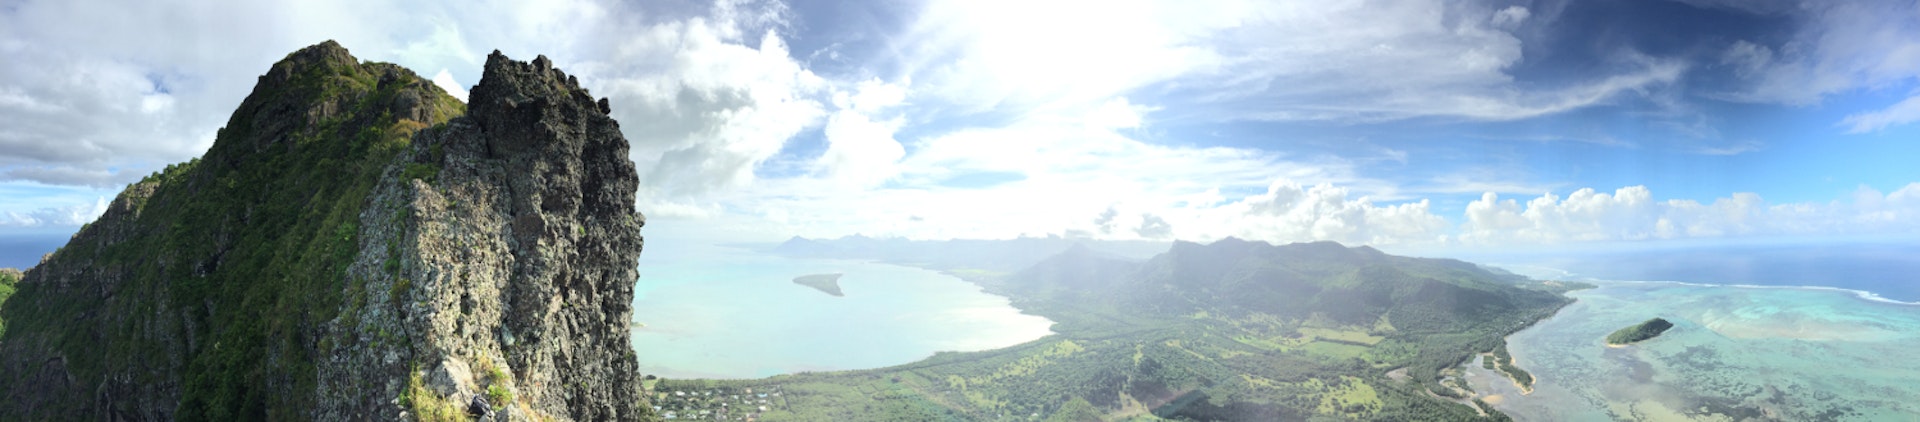 The view looking back from the upper reaches of Le Morne Brabant. Image by Matt Phillips / Lonely Planet